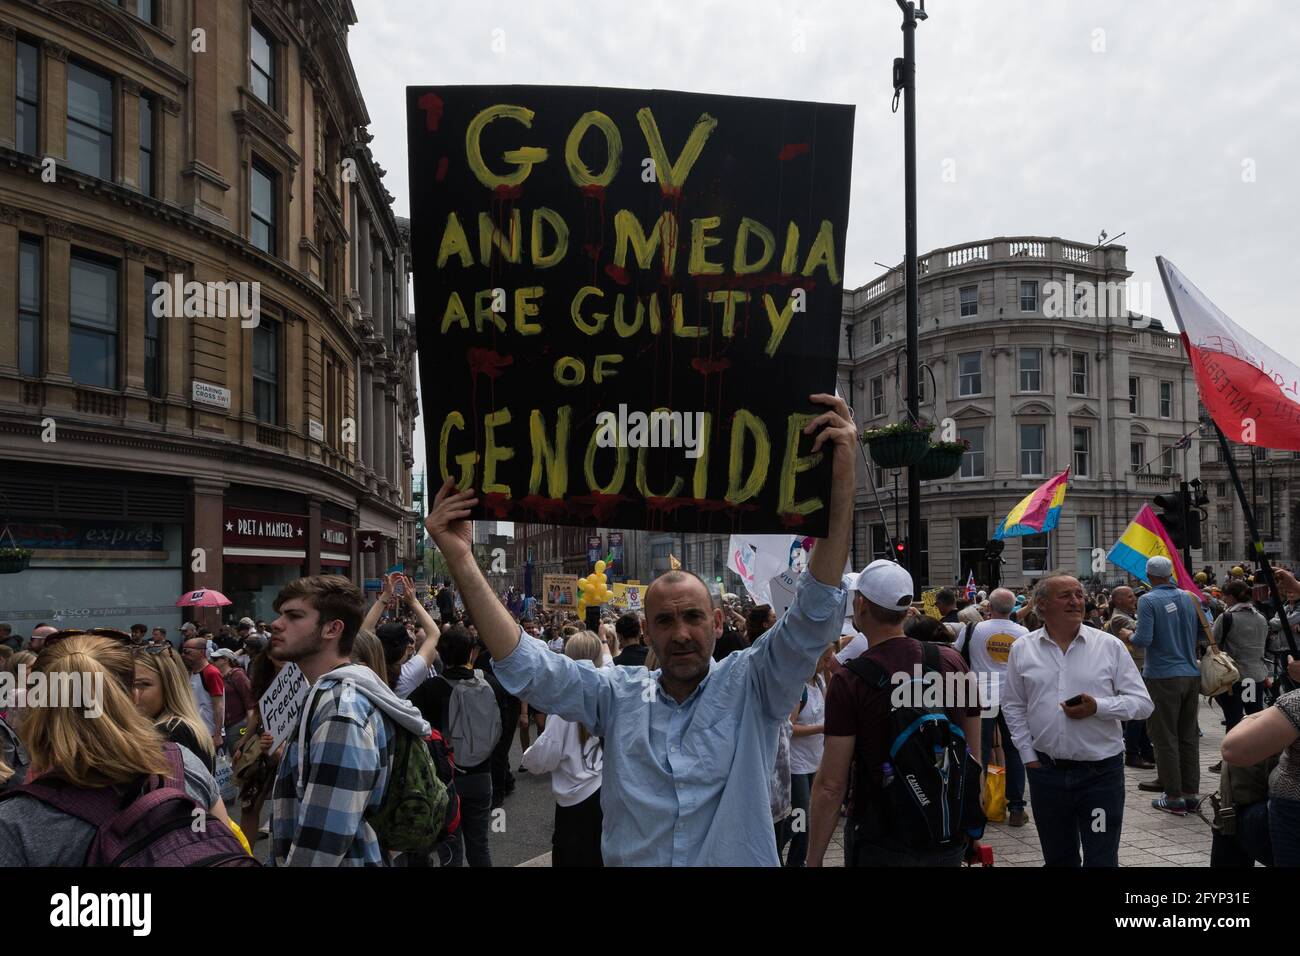 London, UK. 29th May, 2021. Thousands of demonstrators march through central London in a protest against the restrictions and legislations imposed by the Government to control the spread of coronavirus, lockdowns, mandatory face masks, vaccines and vaccine passports. Credit: Wiktor Szymanowicz/Alamy Live News Stock Photo